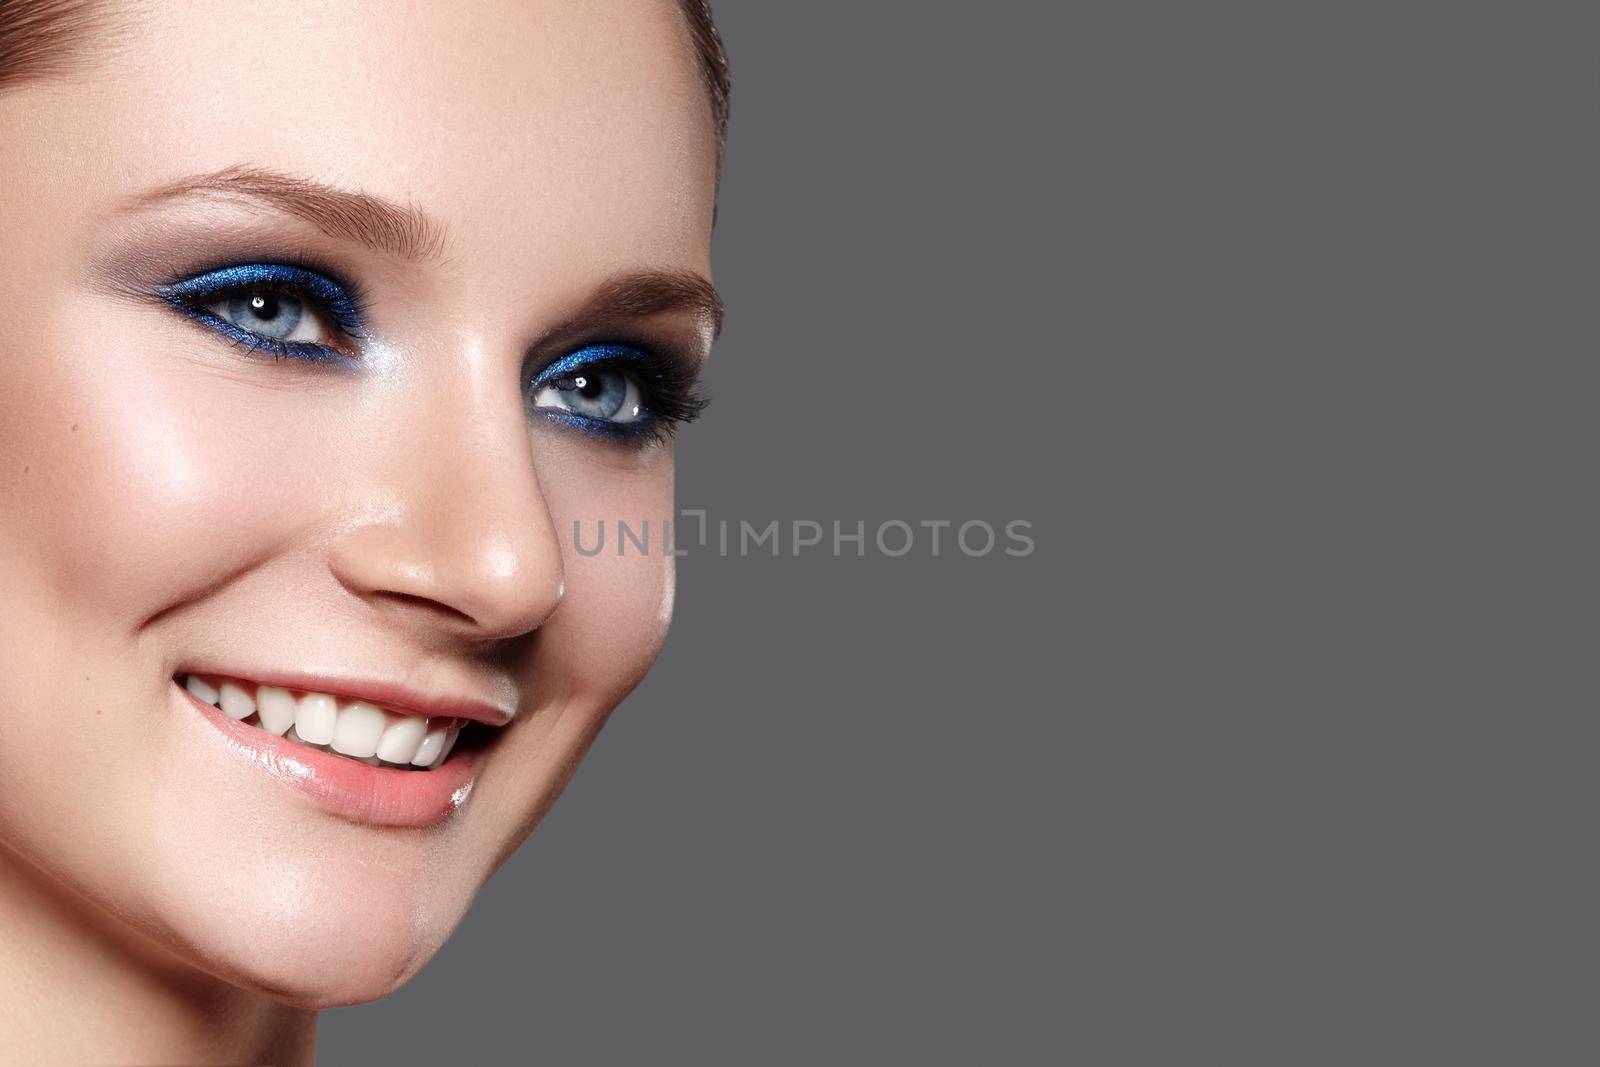 Beautiful Woman with Professional Blue Makeup. Celebrate Style Eye Make-up and Shine Skin. Smiling Fashion Model. Beautifil Happy Smile